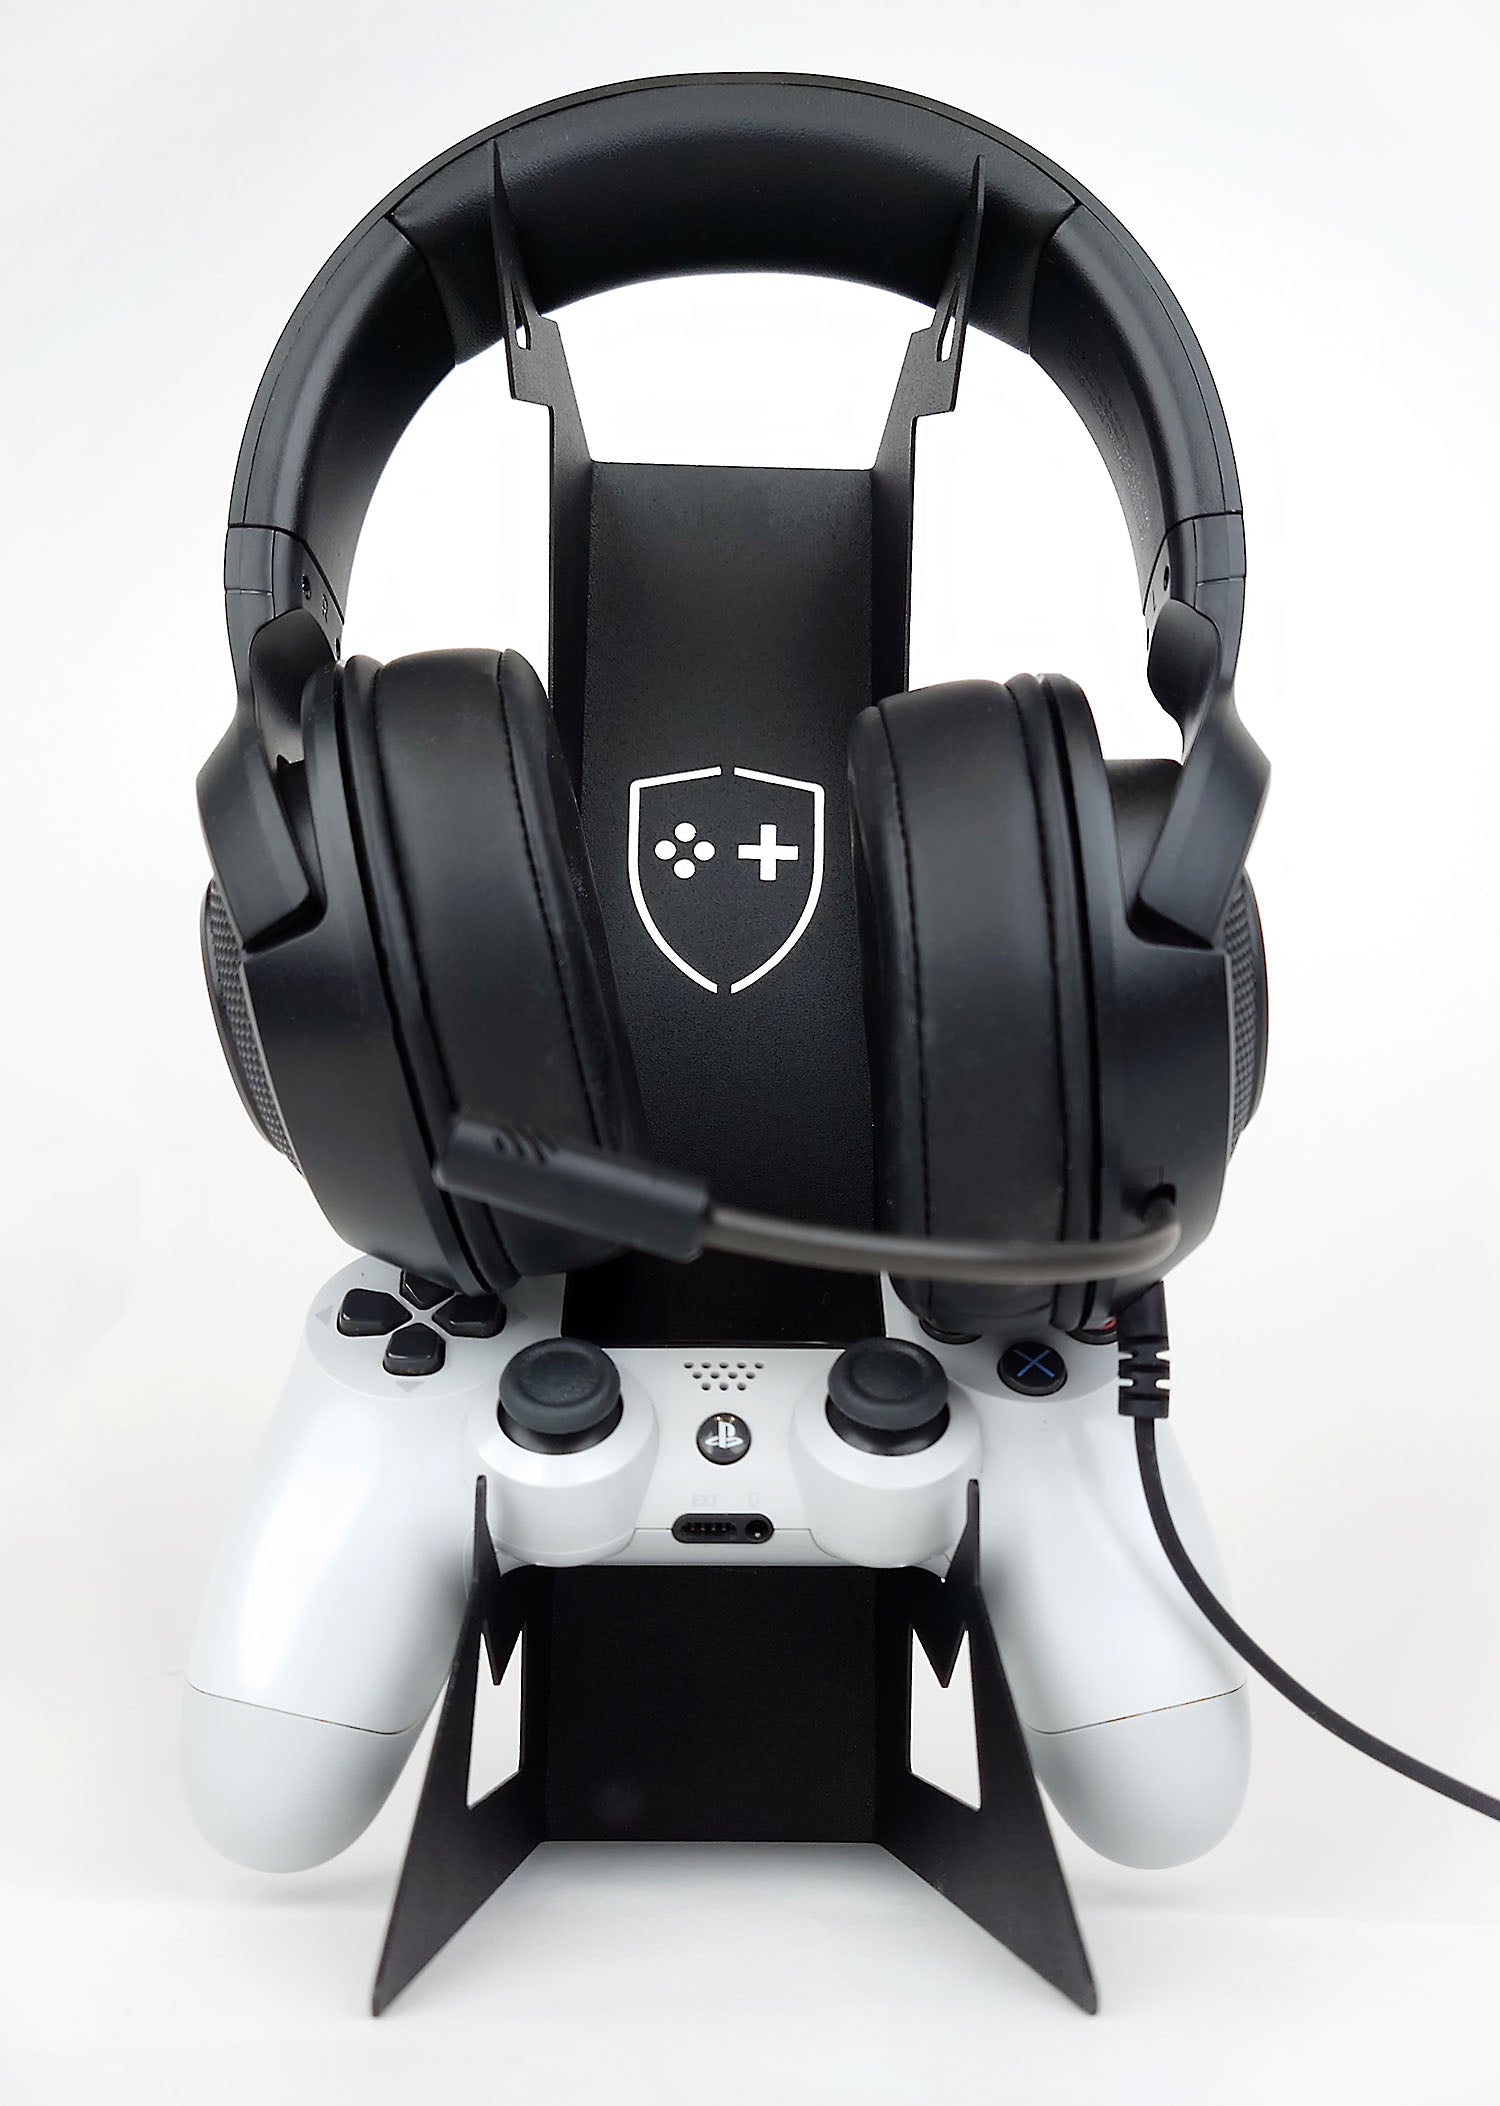 GameShieldz Headset & Controller Stand with Gaming headset and PS4 Controller